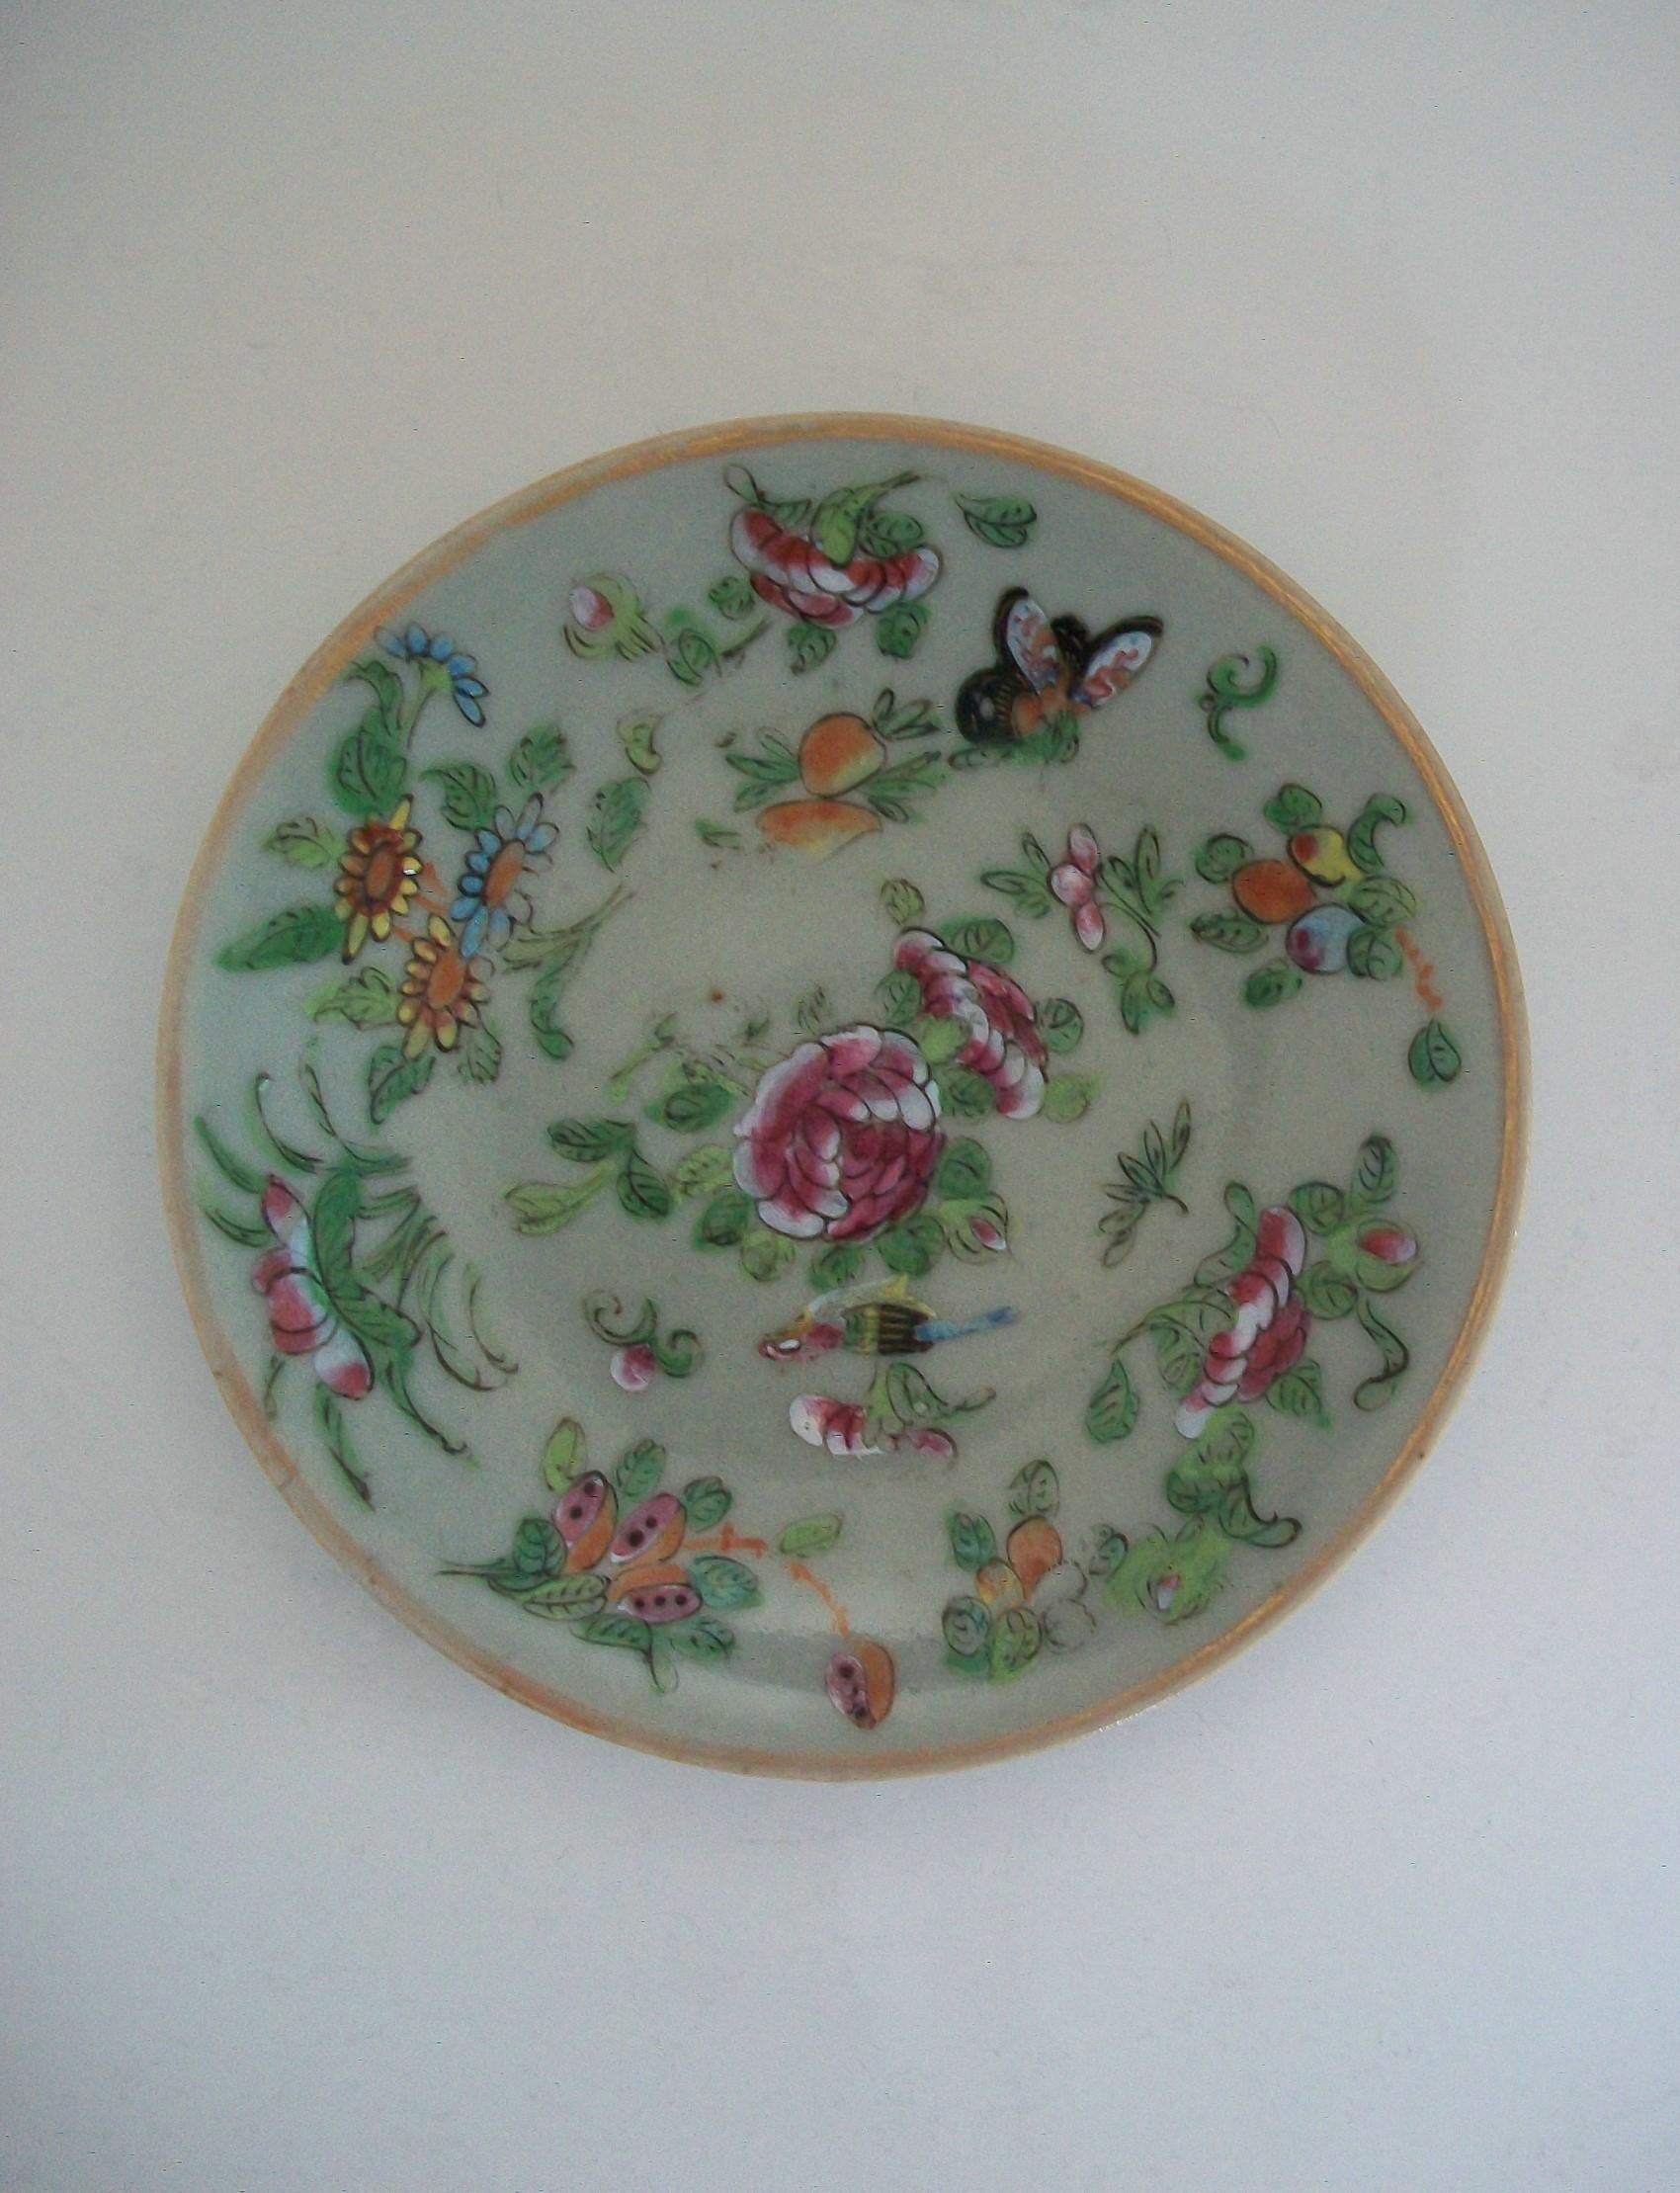 Hand-Crafted Qing Chinese Export Celadon 'Famille Rose' Plate, Square Seal Mark, circa 1820